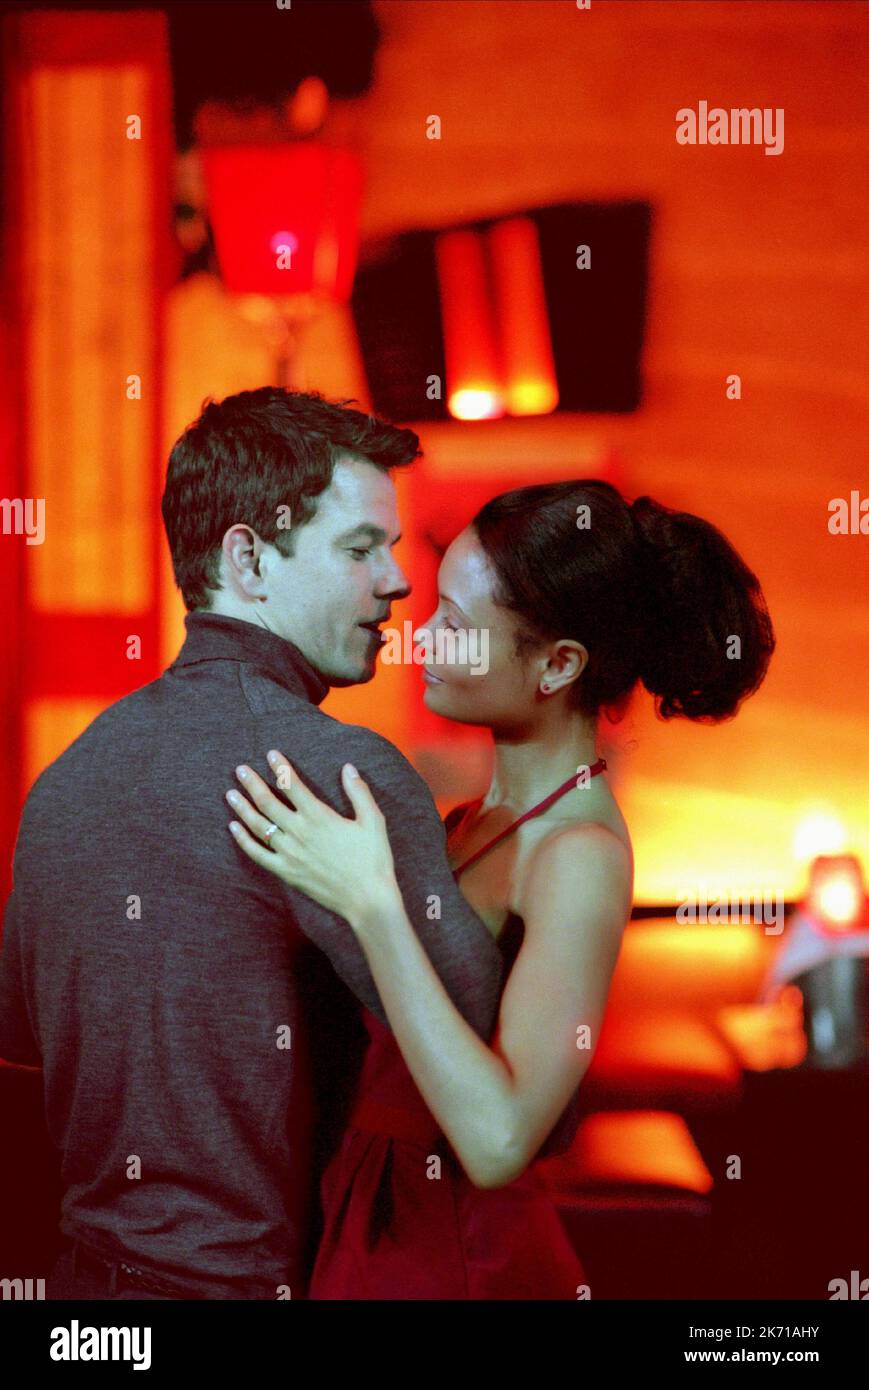 MARK WAHLBERG, THANDIE NEWTON, THE TRUTH ABOUT CHARLIE, 2002 Stock Photo